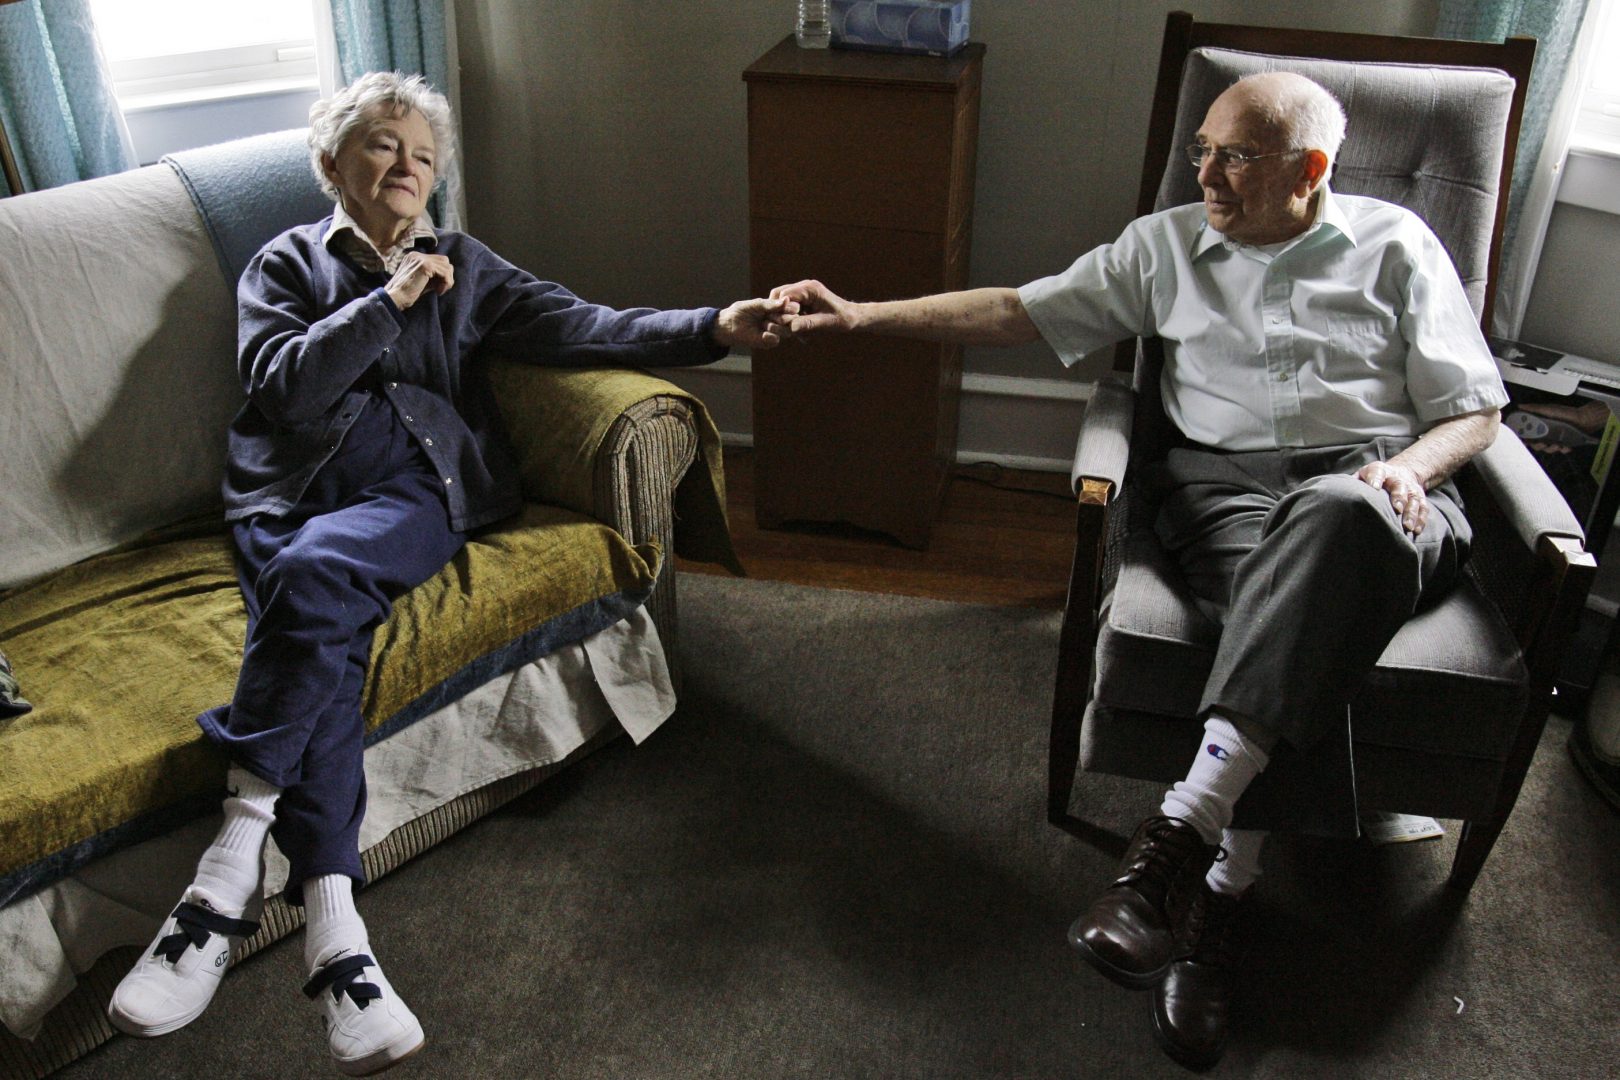 Alzheimer's patient Dorothy Eckert and her husband John Eckert's hold hands at their home  in Norristown Pa., Thursday, April 19, 2007. Alzheimer's caregivers seldom can make time in their daily grind to seek out help. And when they do, they too often find waiting lists for services, or programs geared only toward people with advanced disease and not the larger pool in the purgatory that is dementia's decade-long middle ground between independence and helplessness. 